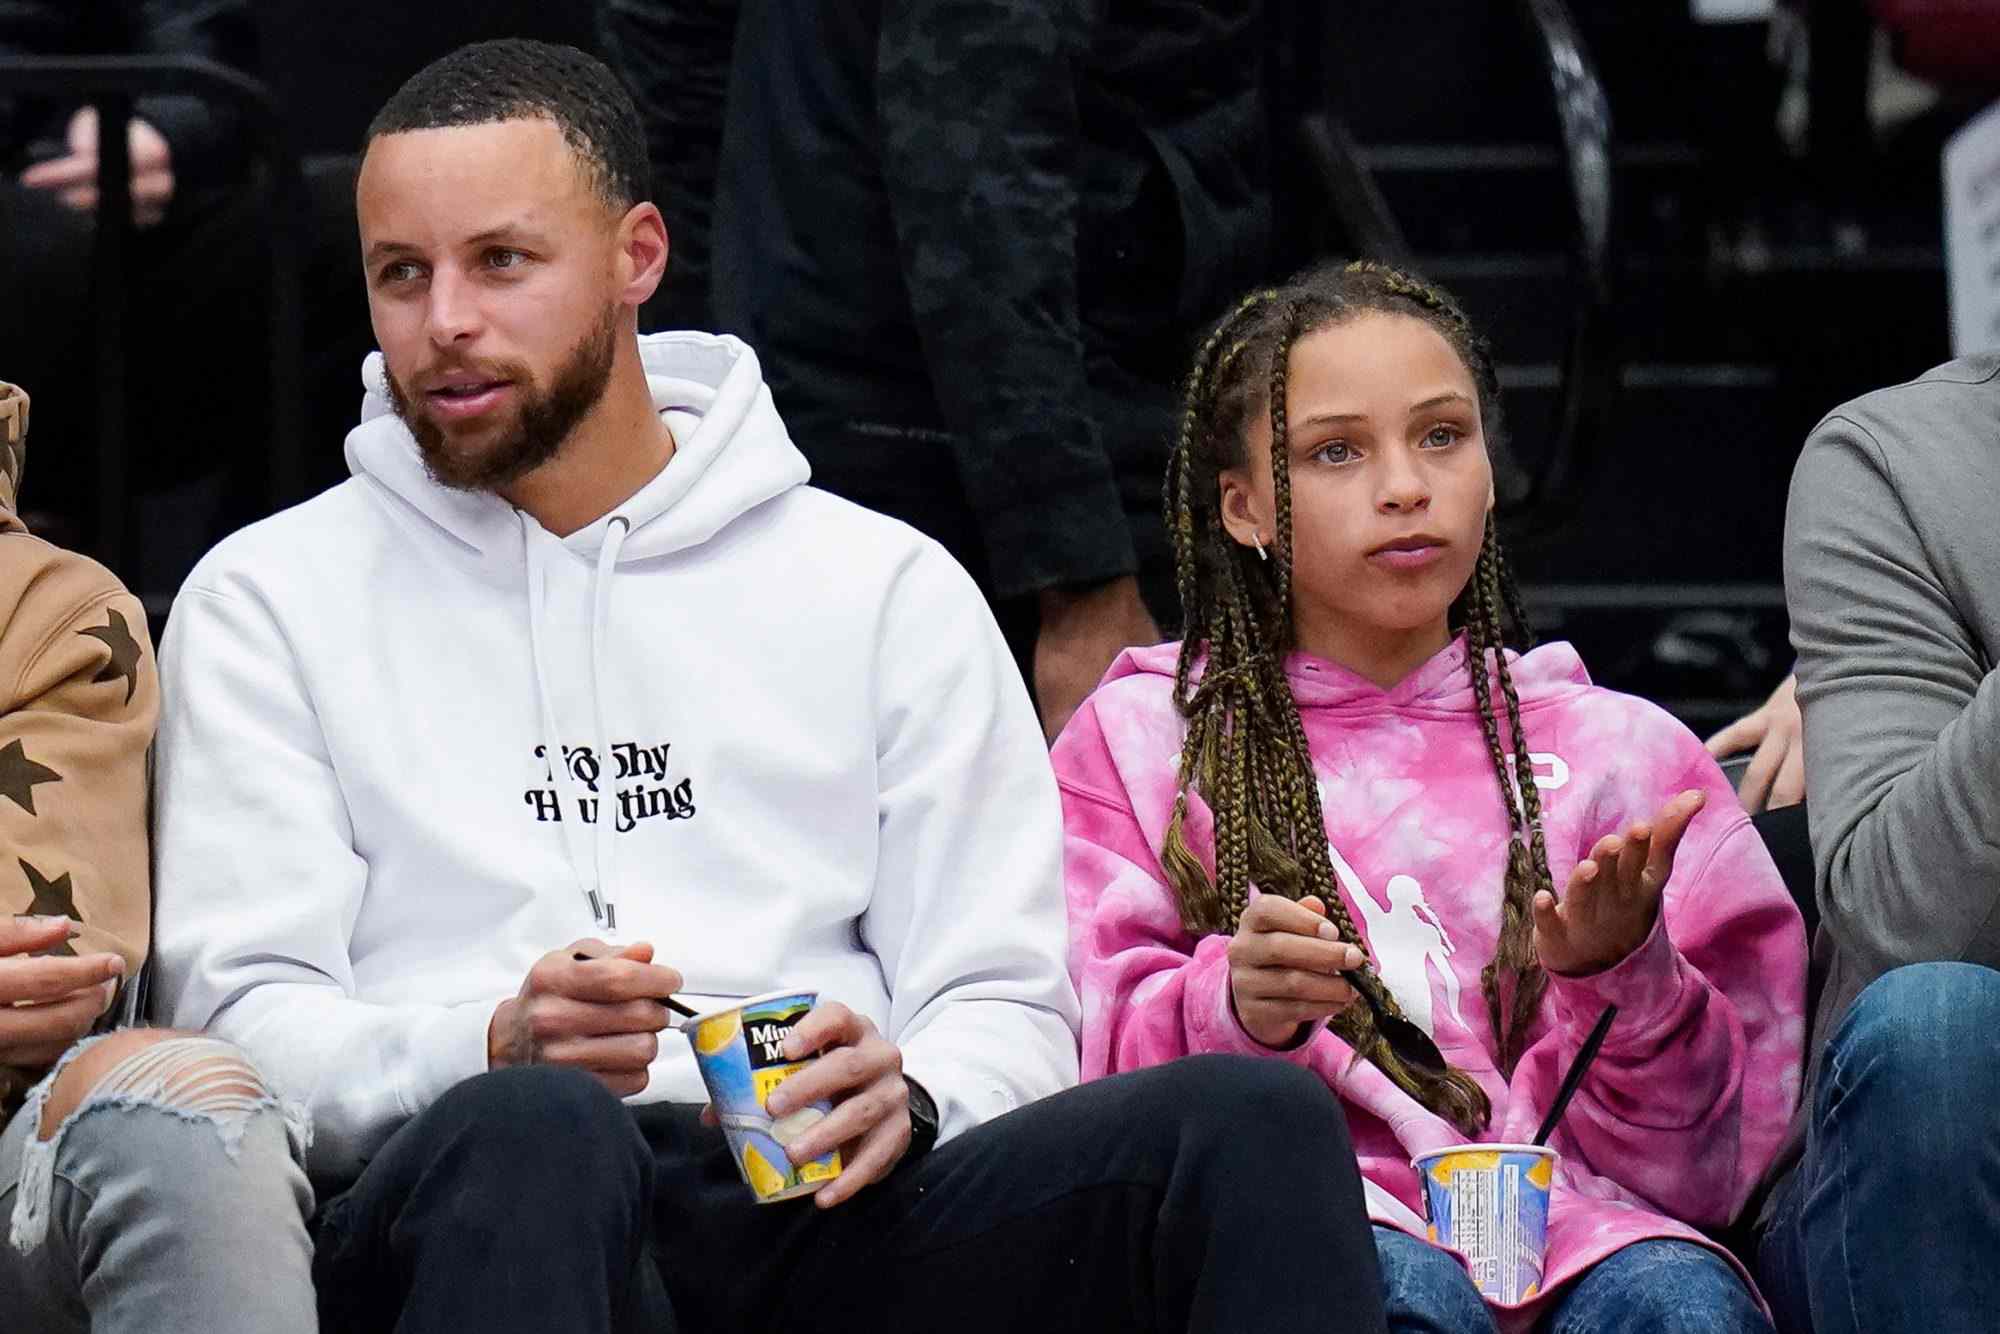 Trey Lance, second from left, talks with Stephen Curry, right, while sitting courtside during the second half of an NCAA college basketball game between Stanford and Southern California in Stanford, Calif., Friday, Feb. 17, 2023. (AP Photo/Godofredo A. Vásquez)